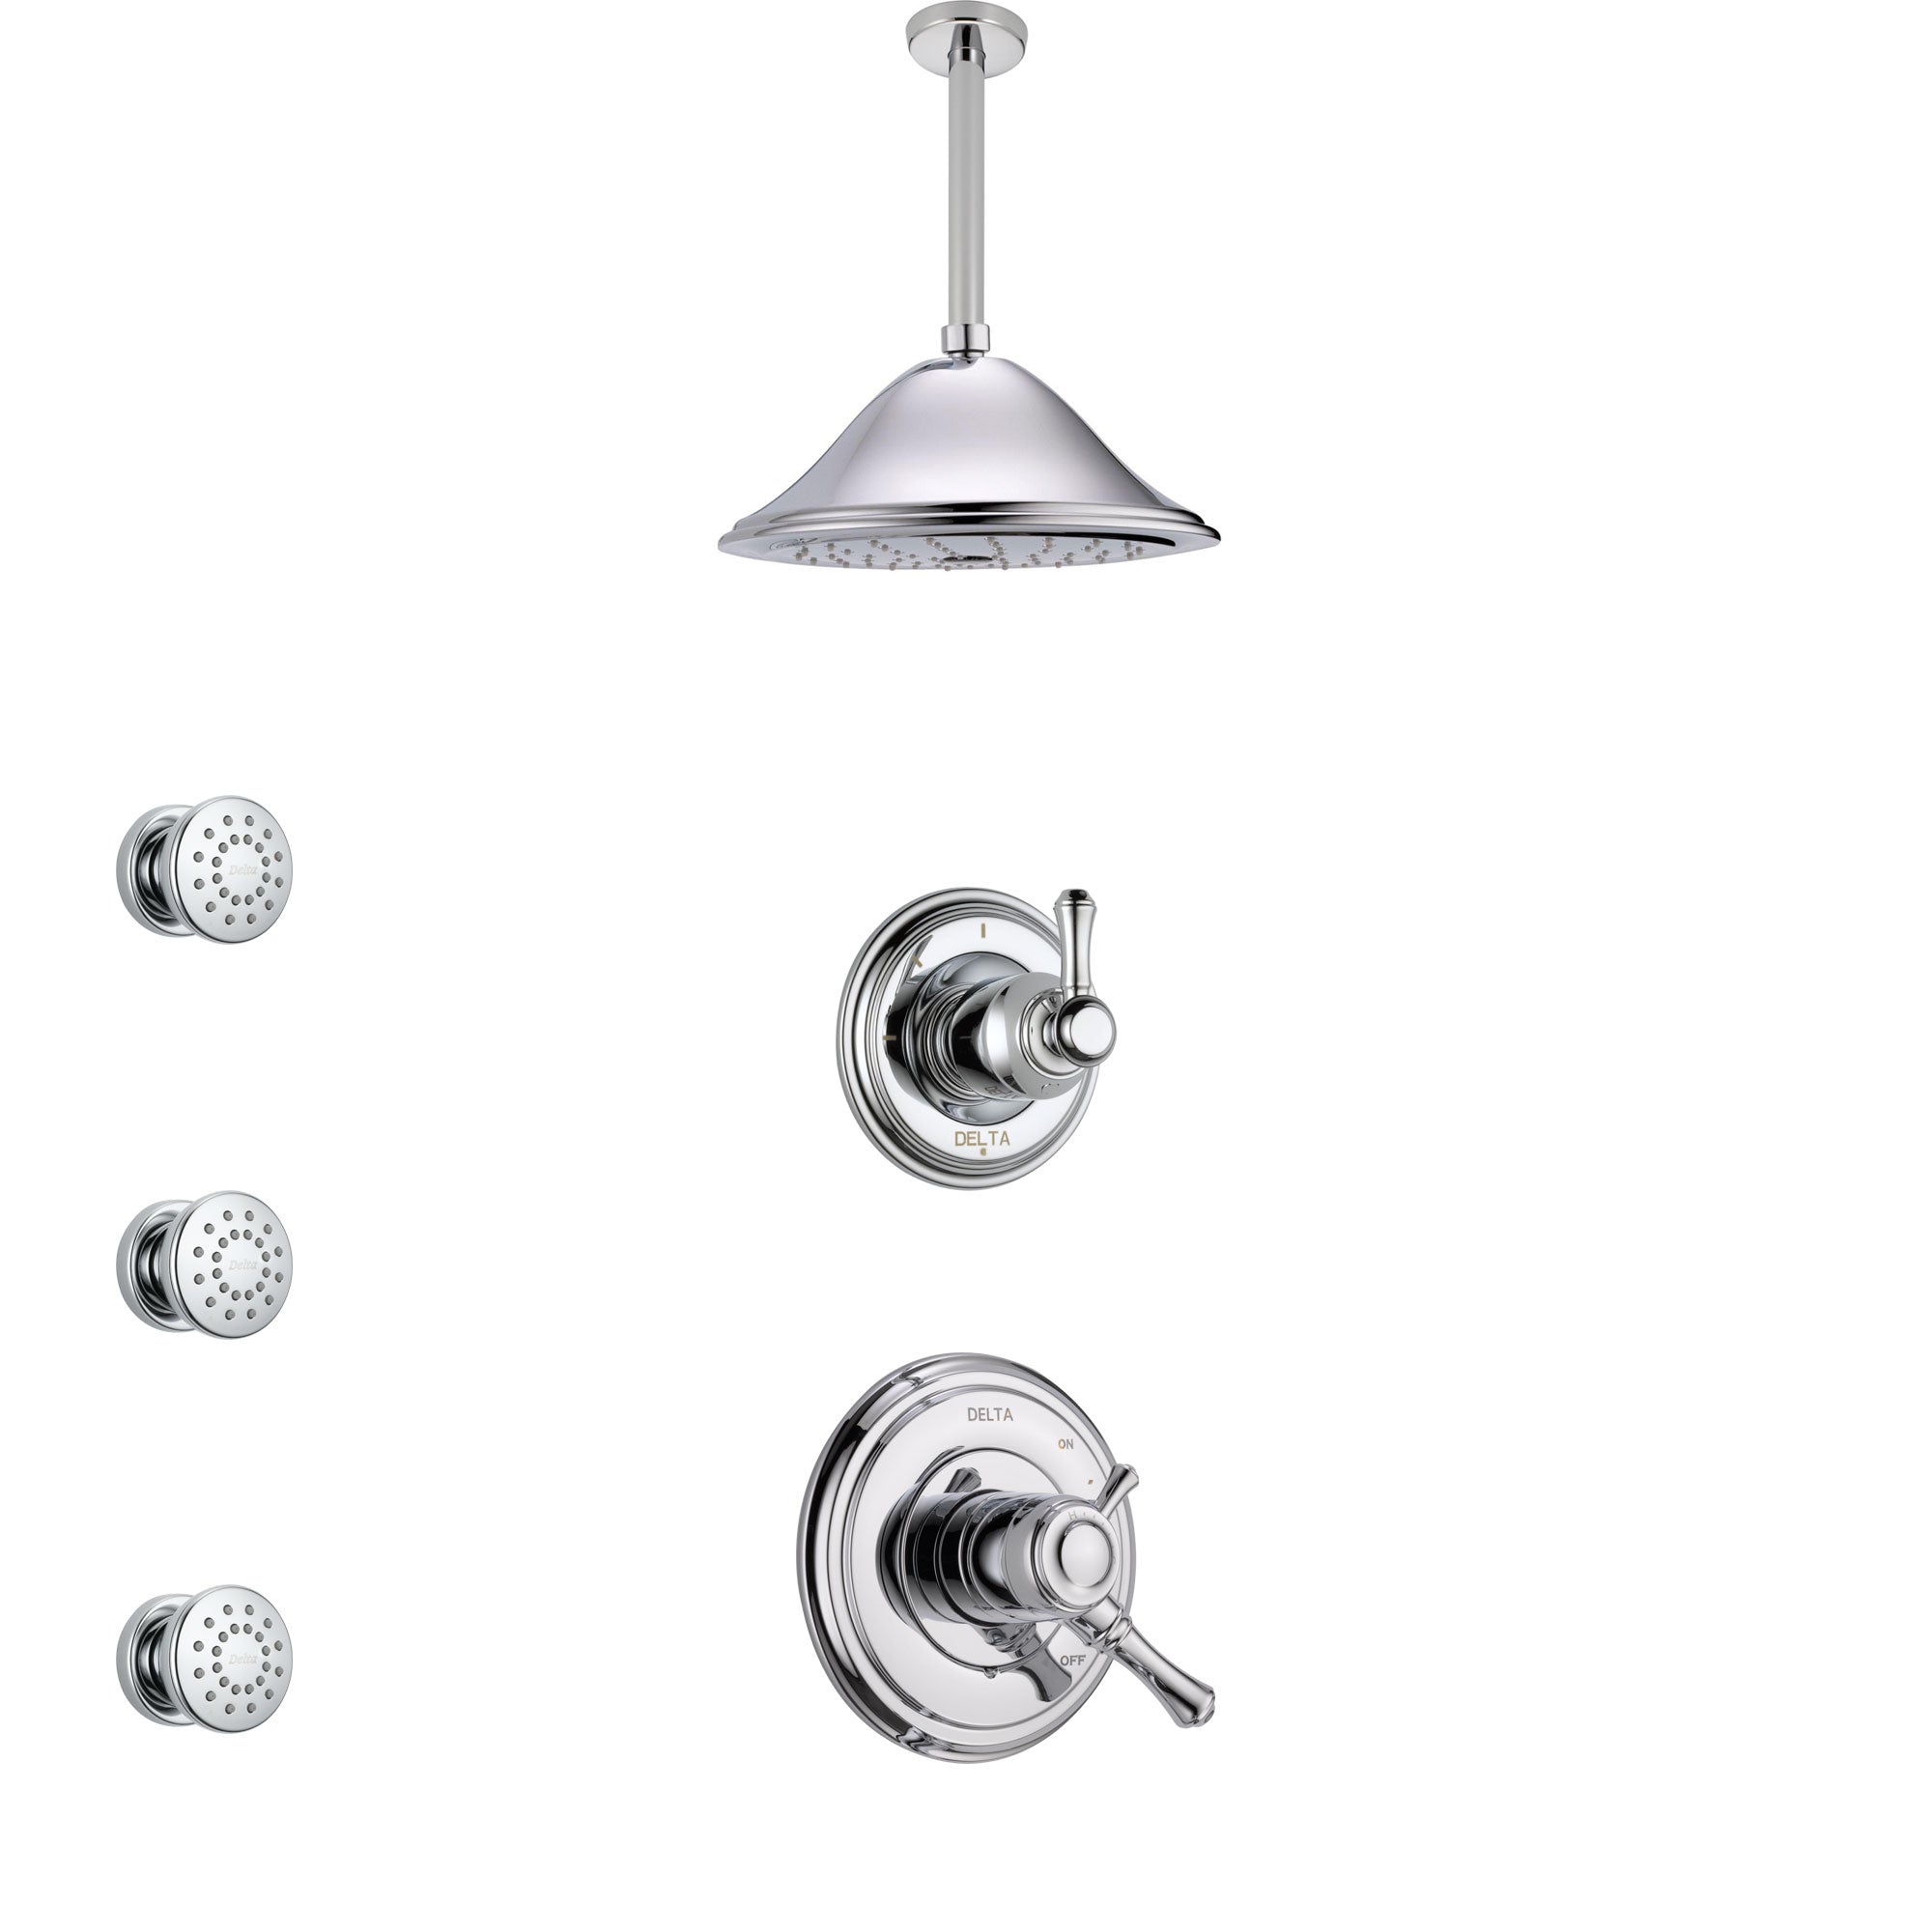 Delta Cassidy Chrome Finish Shower System with Dual Control Handle, 3-Setting Diverter, Ceiling Mount Showerhead, and 3 Body Sprays SS17975